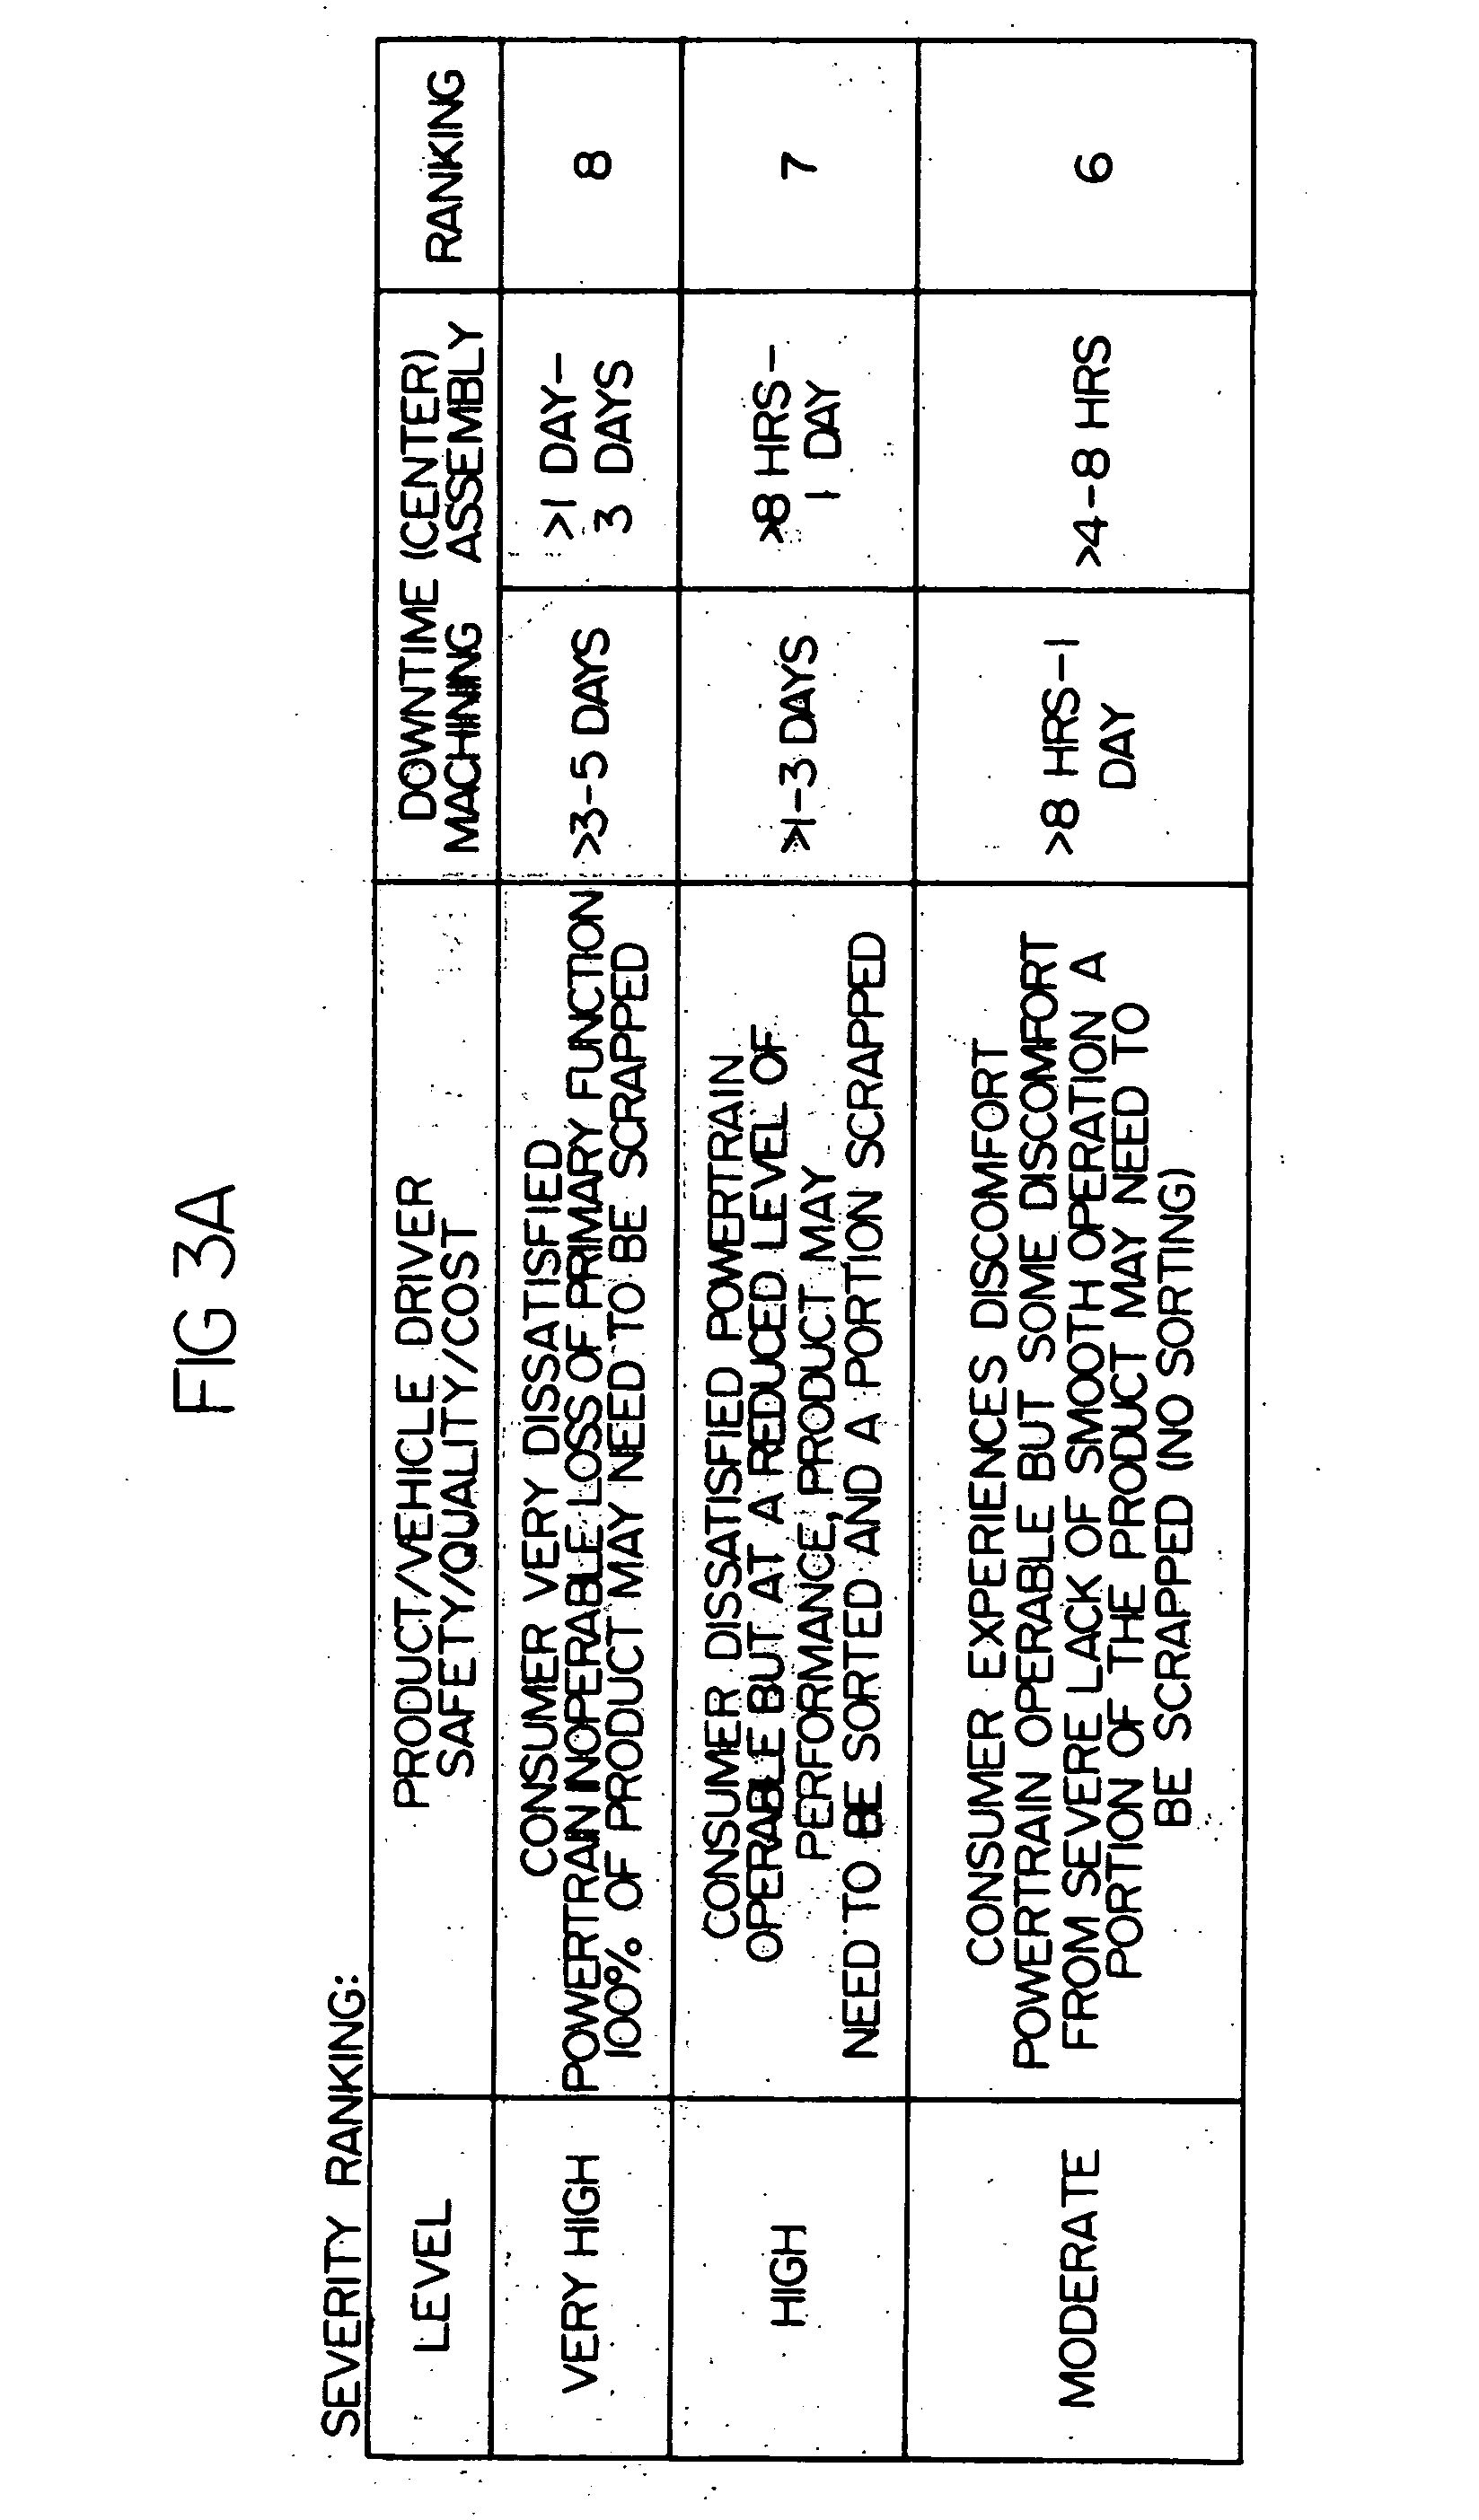 Method for performing failure mode and effects analysis